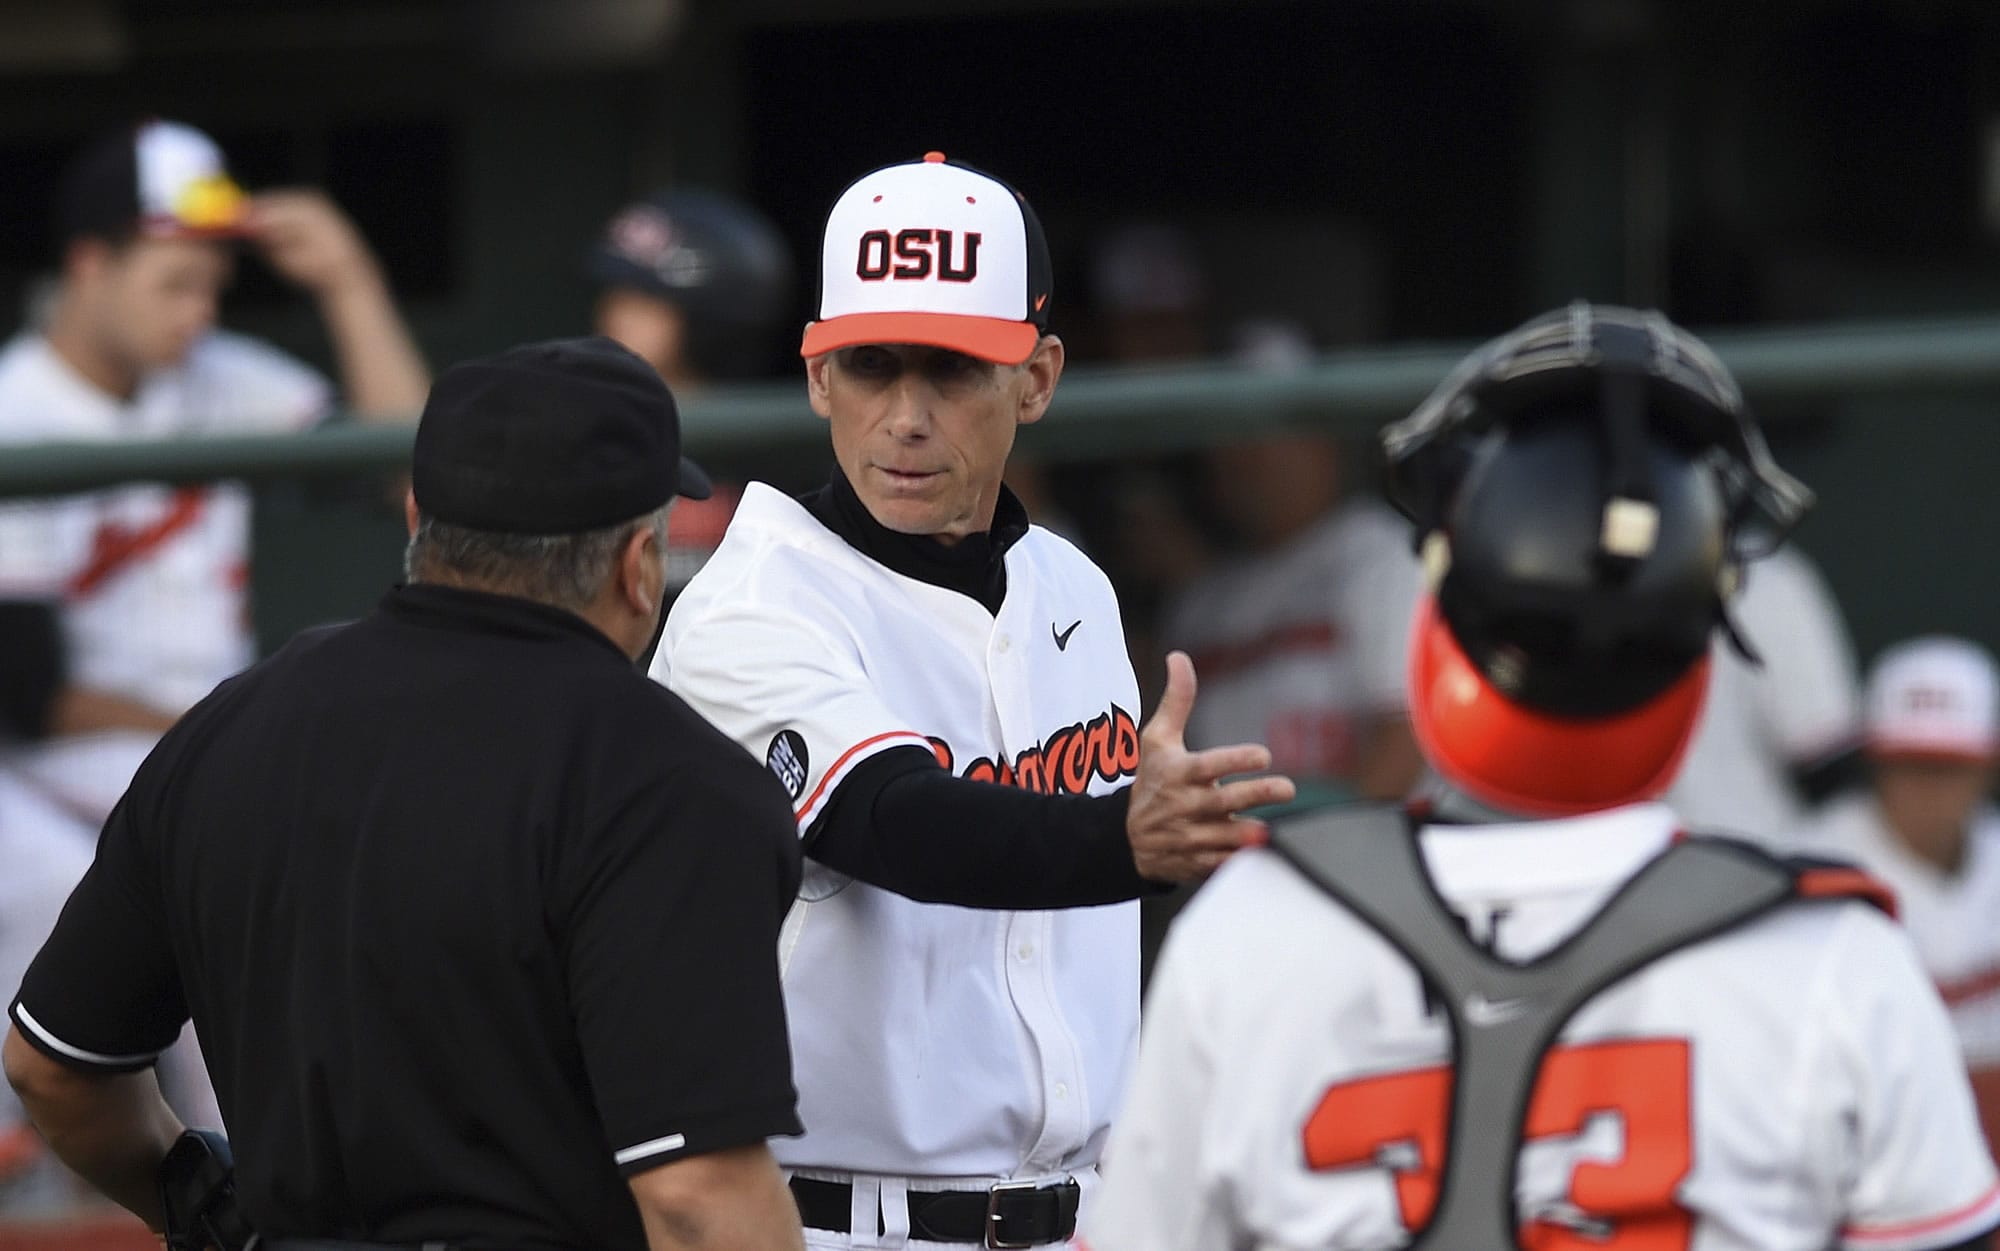 Oregon State coach Pat Casey leads the Beavers into the NCAA tournament as the No. 1 national seed. His team went 49-4 and set a Pac-12 record with 27 conference wins.